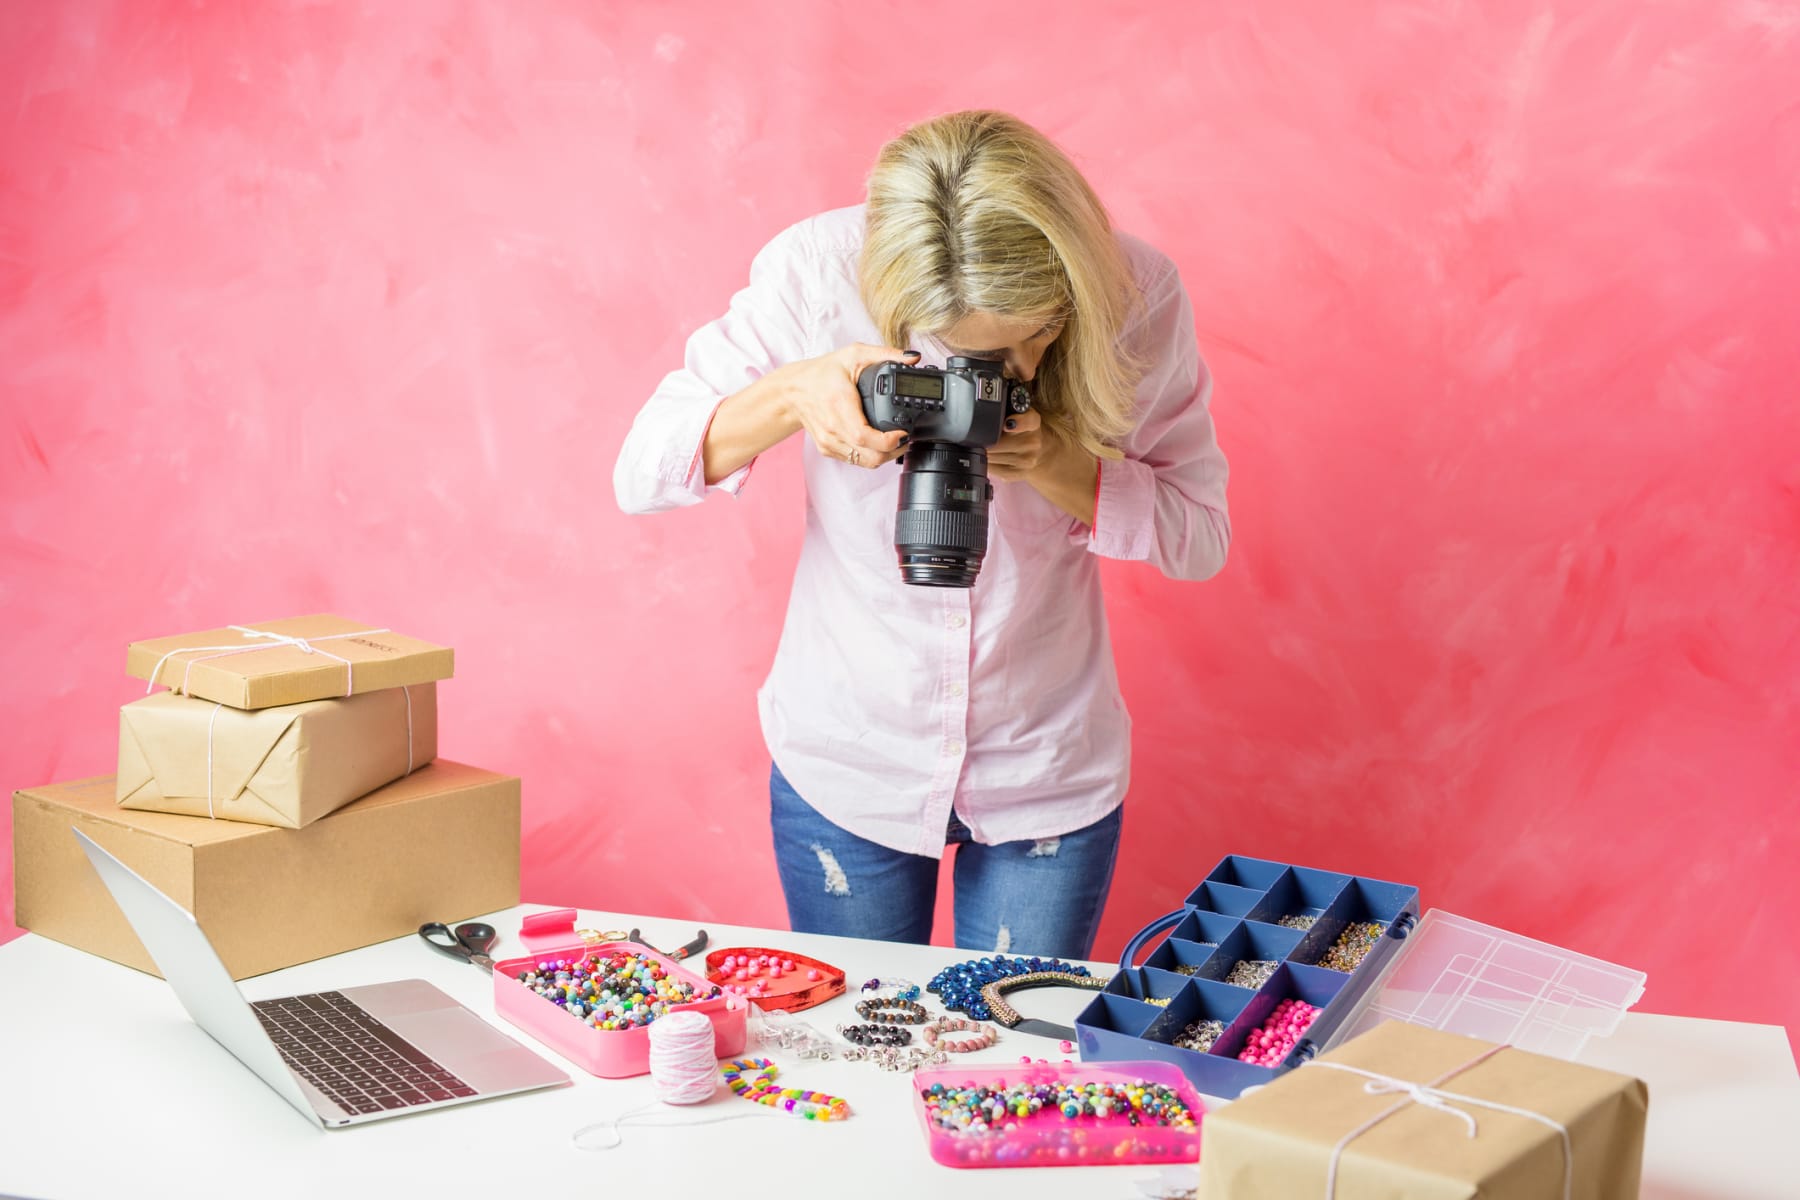 Woman Taking Photos of Products for Online Store